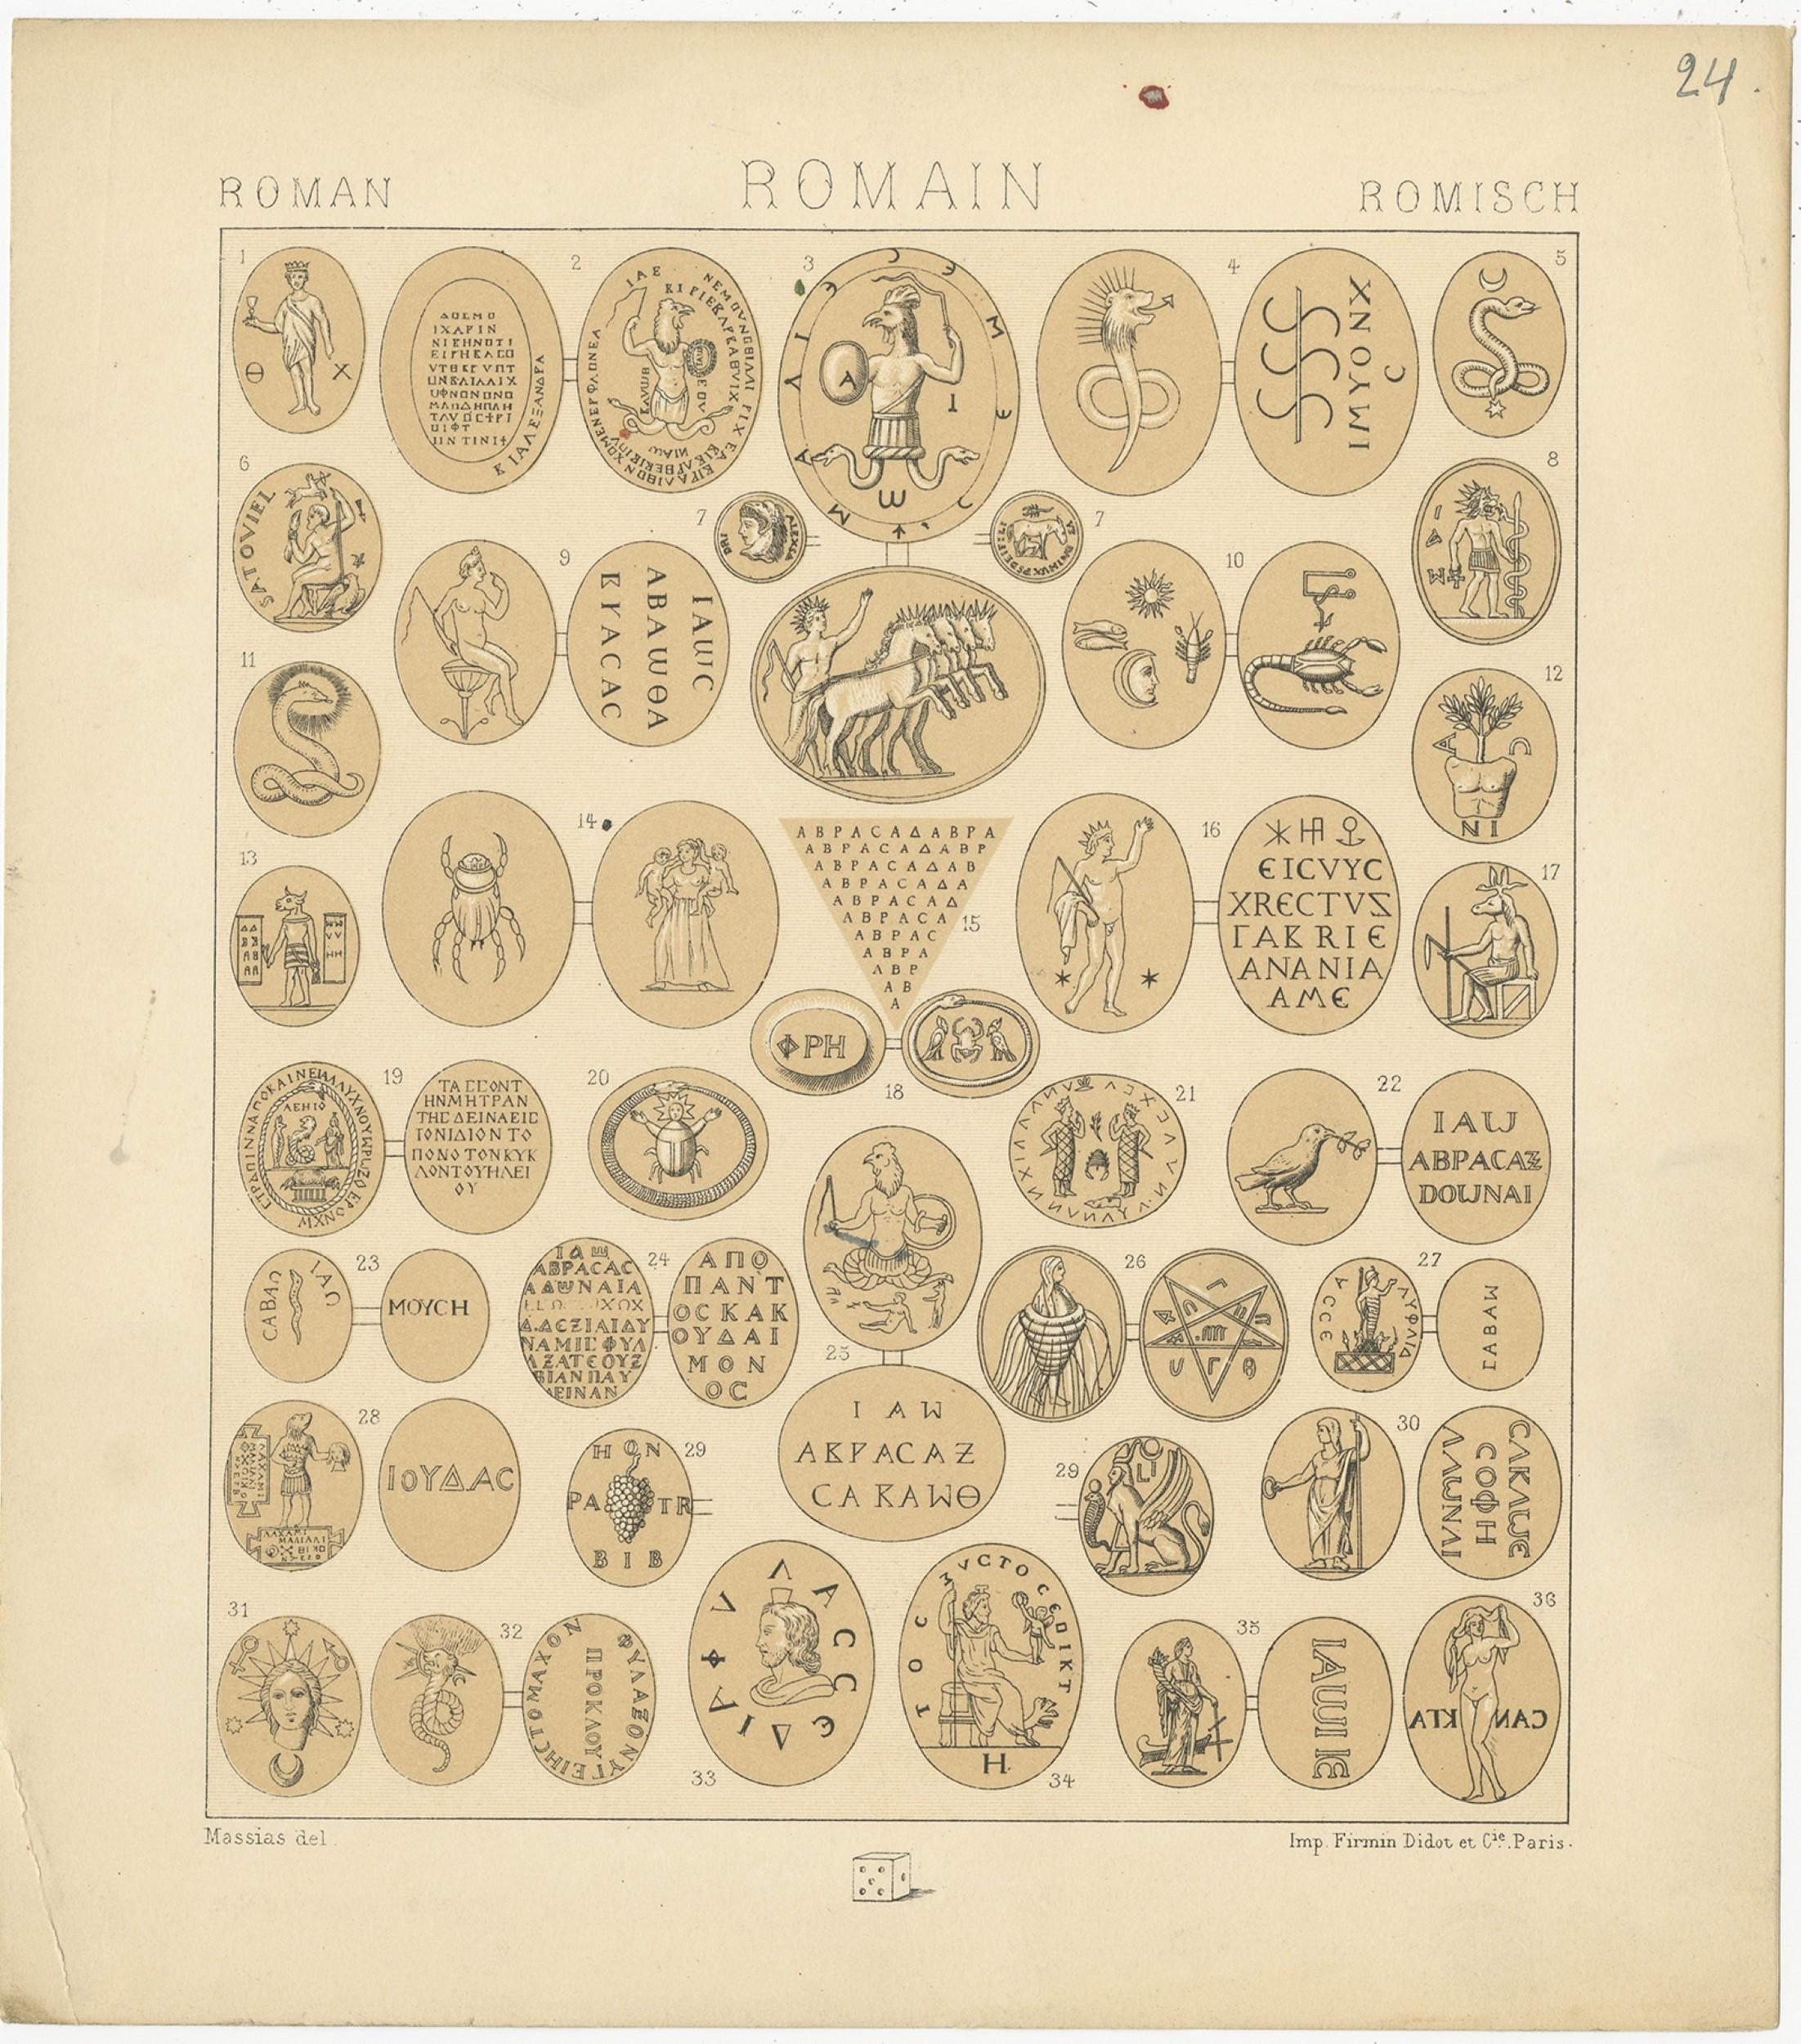 Antique print titled 'Roman - Romain - Romisch'. Chromolithograph of Roman Decorative Objects. This print originates from 'Le Costume Historique' by M.A. Racinet. Published, circa 1880.